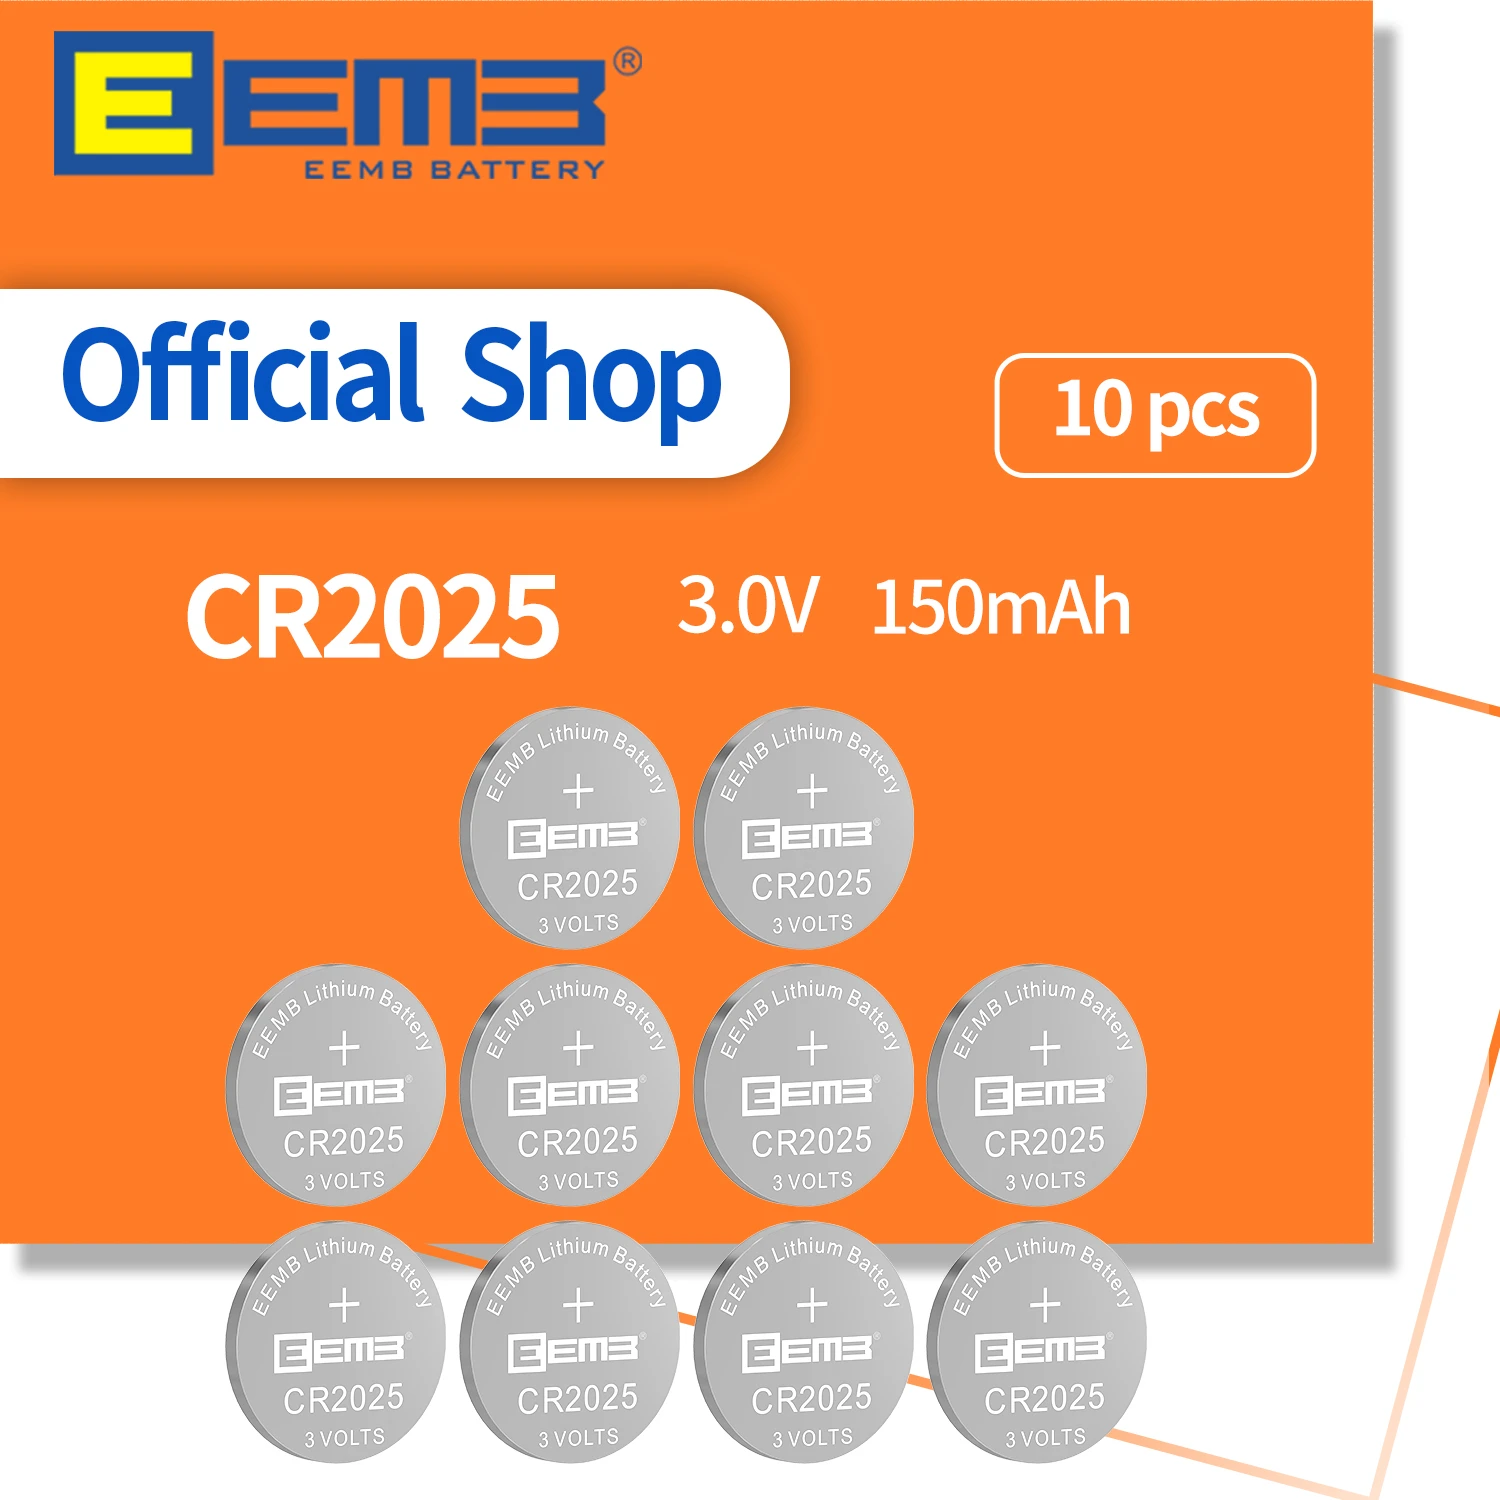 remote battery EEMB 10PCS CR2025 Button Battery 2025 3V 150mAh Lithium Battery Coin Cell Batteries for Toy Watch Calculator Tablets Scale replacement batteries